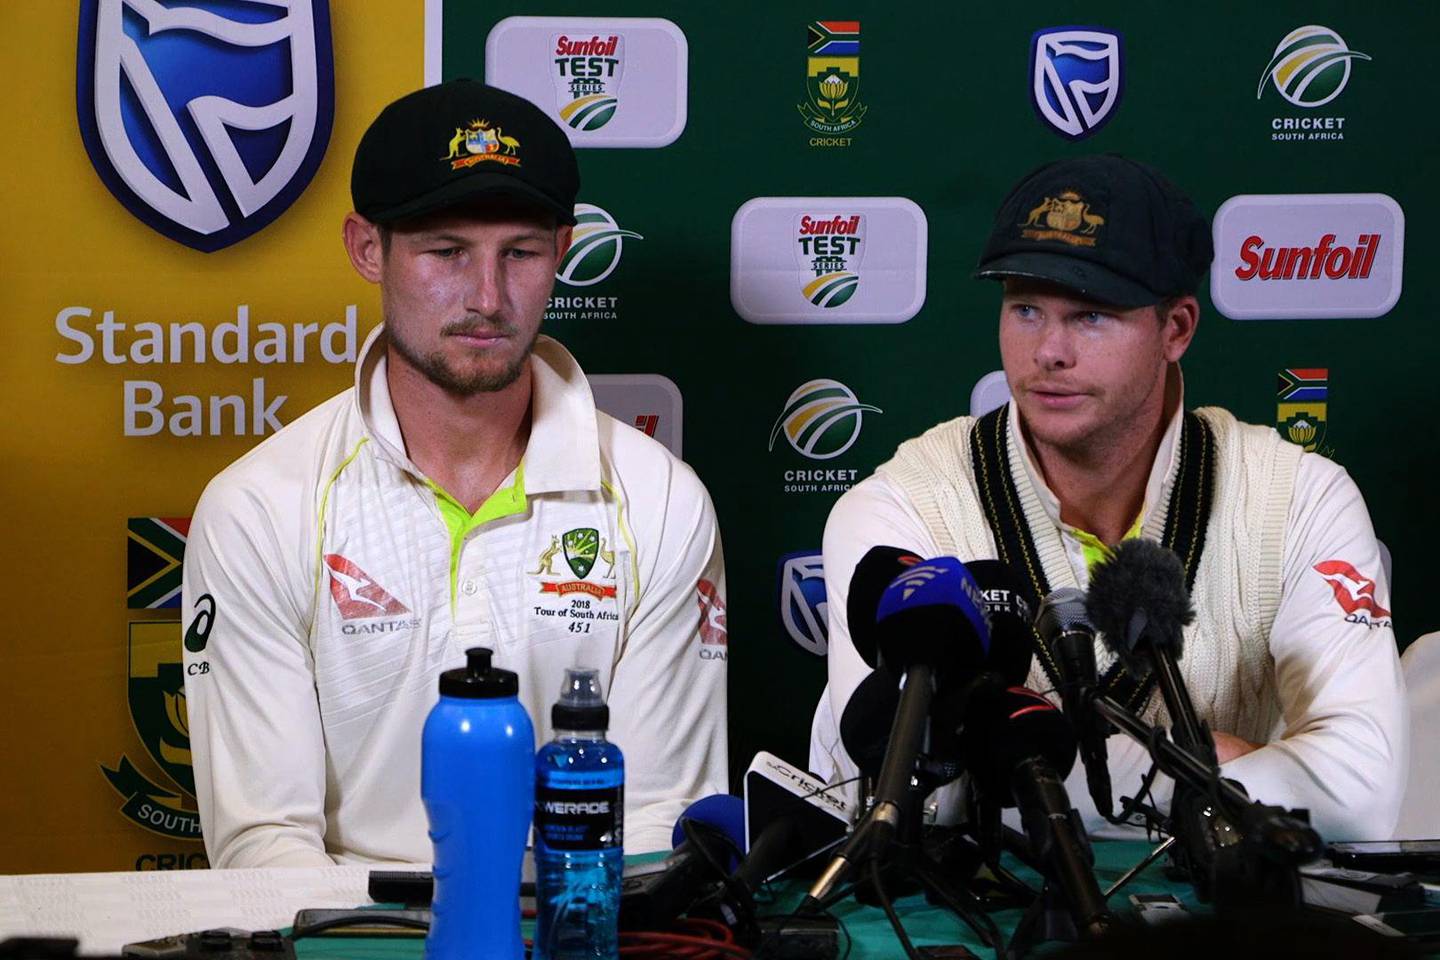 This video grab taken from a footage released by AFP TV shows Australia's captain Steve Smith (R), flankled by teammate Cameron Bancroft, speaking during a press conference in Cape Town, on March 24, 2018 as he admitted to ball-tampering during the third Test against South Africa.
Australia captain Steve Smith and team-mate Cameron Bancroft sensationally admitted to ball-tampering during the third Test against South Africa on March 24, 2018, plunging cricket into potentially its greatest crisis. Bancroft was caught on television cameras appearing to rub a yellow object on the ball, and later said: "I was in the wrong place at the wrong time. I want to be here (in the press conference) because I want to be accountable for my actions." / AFP PHOTO / AFP TV / STR